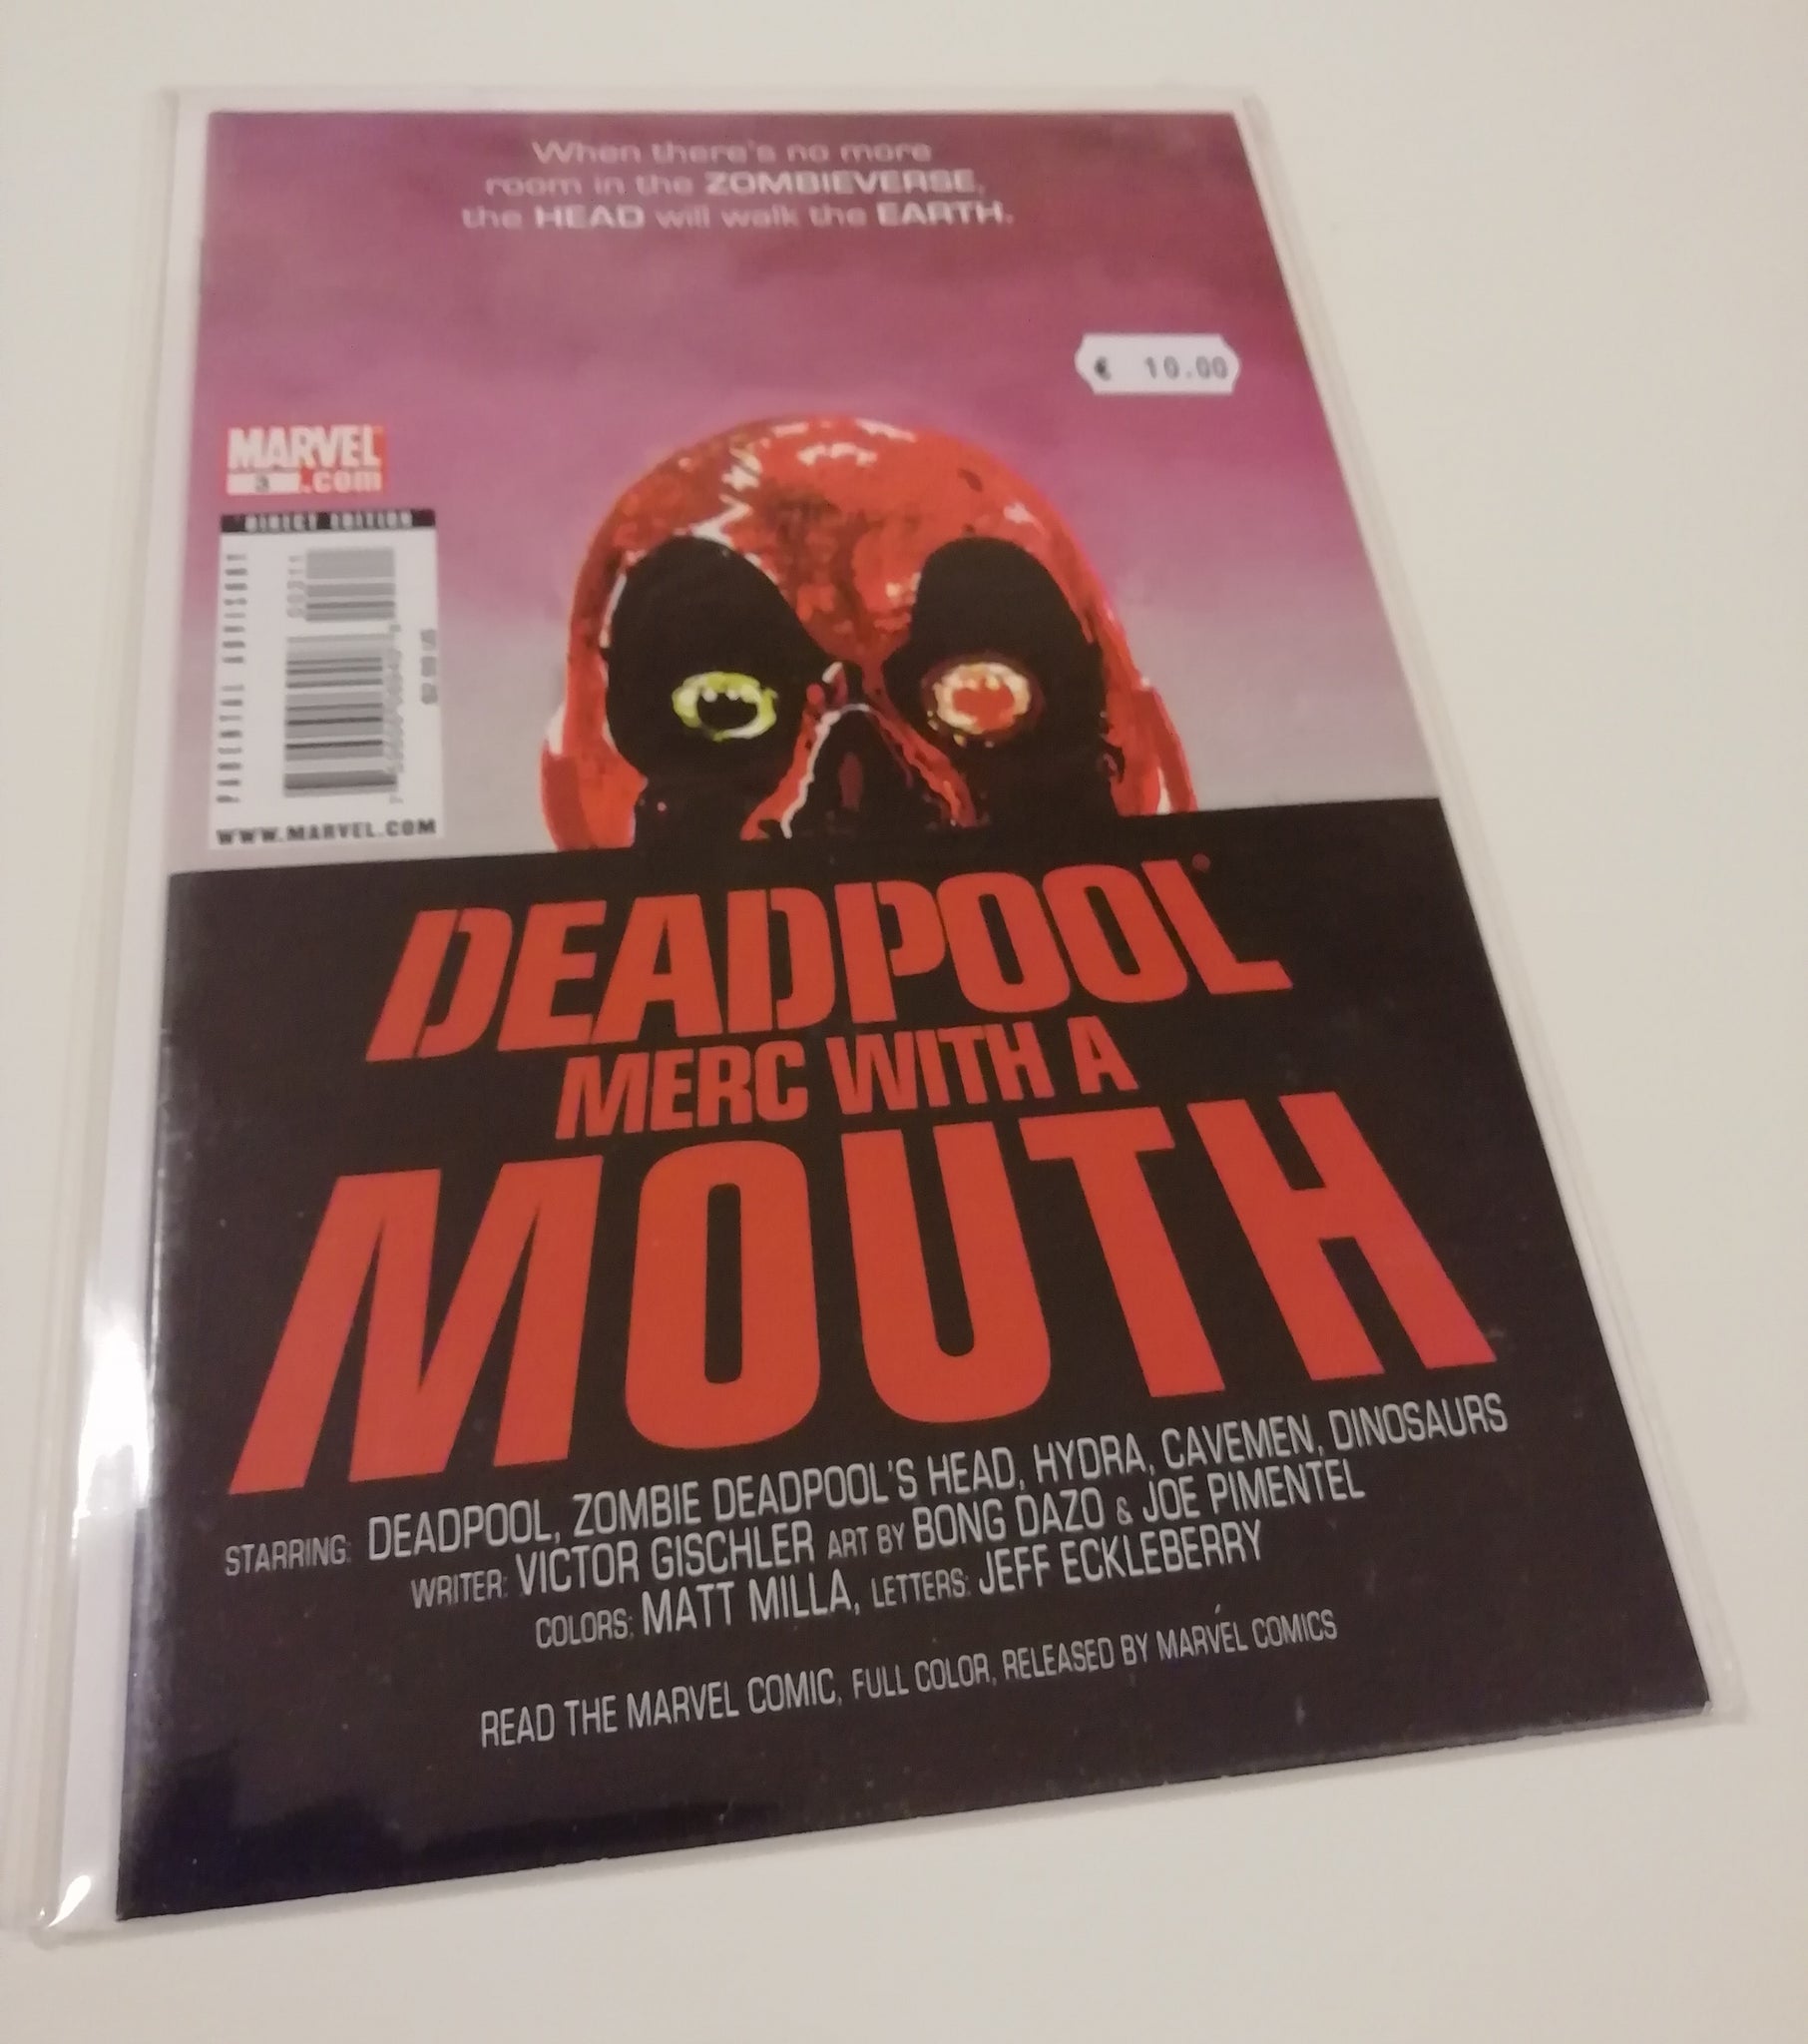 Deadpool Merc with a Mouth #3 NM-